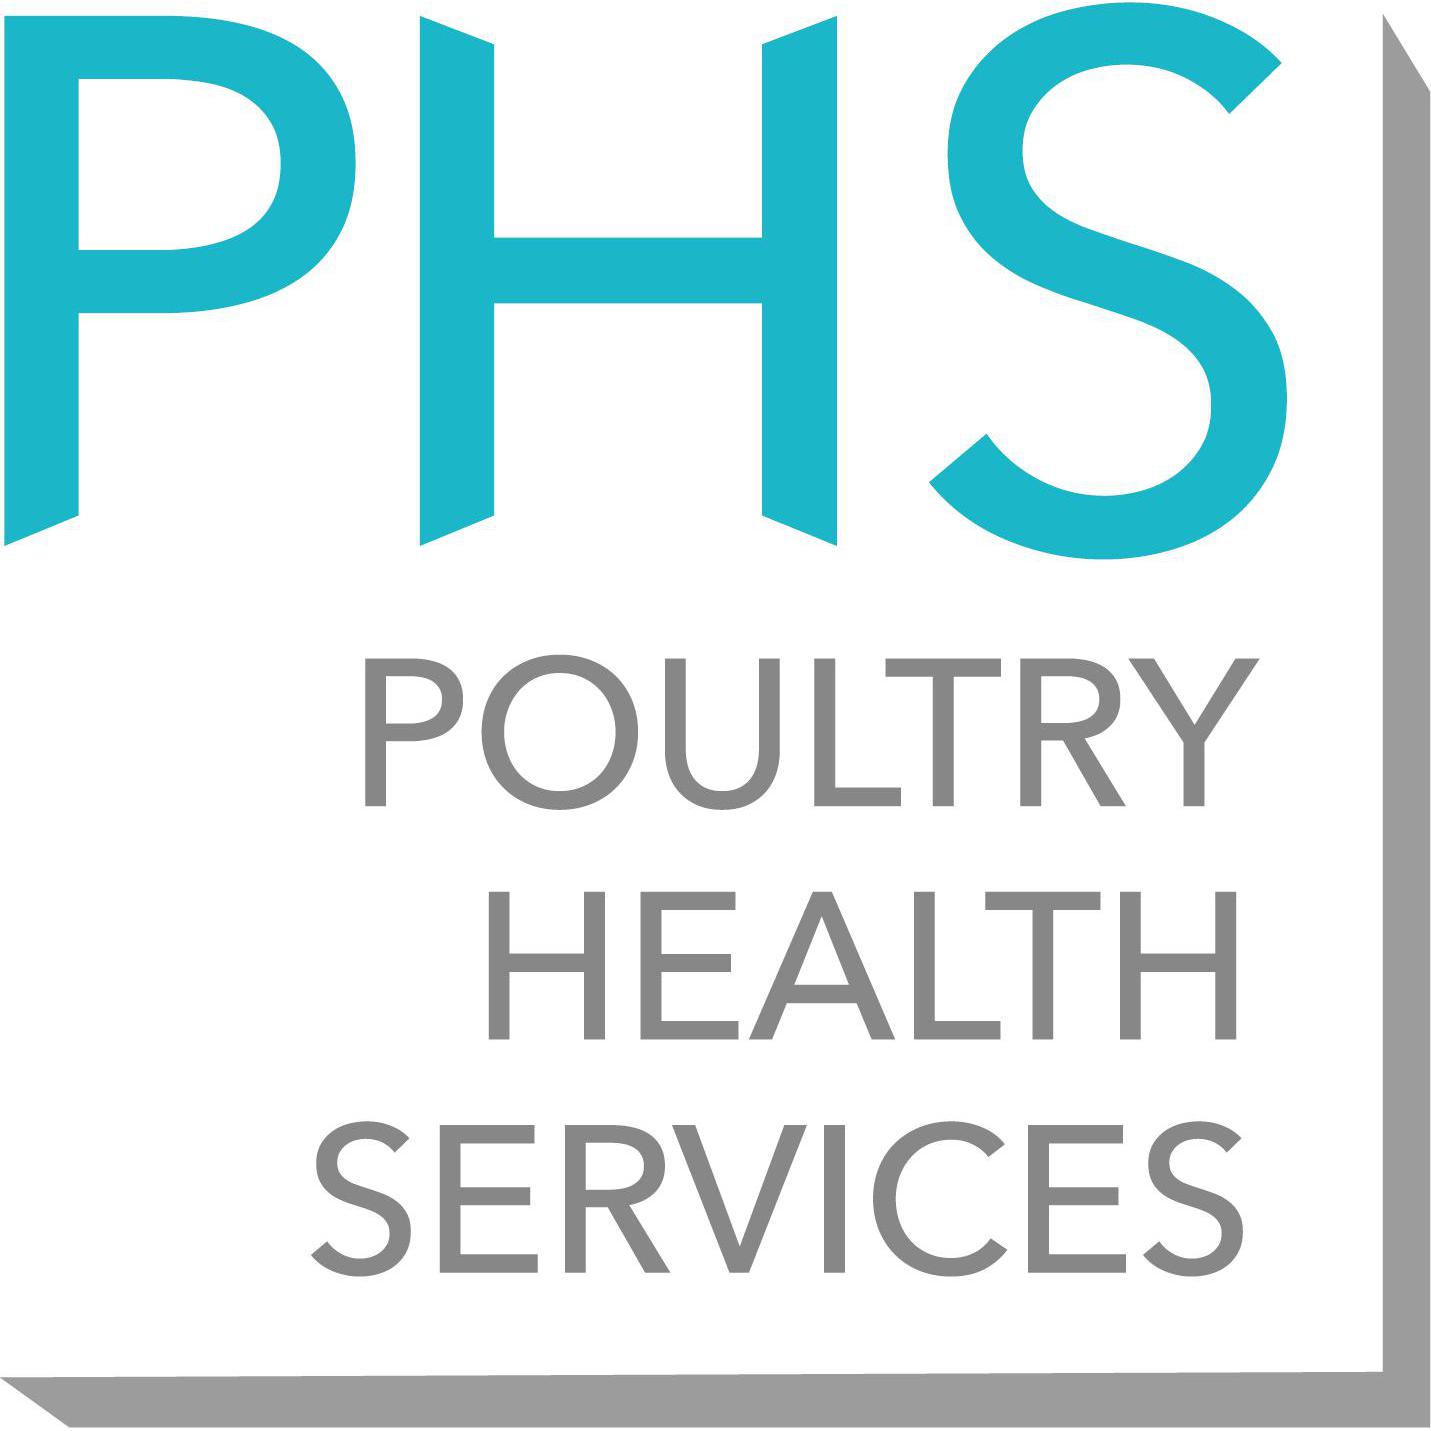 Poultry Health Services (at Wood Vets) Gloucester 01981 241320